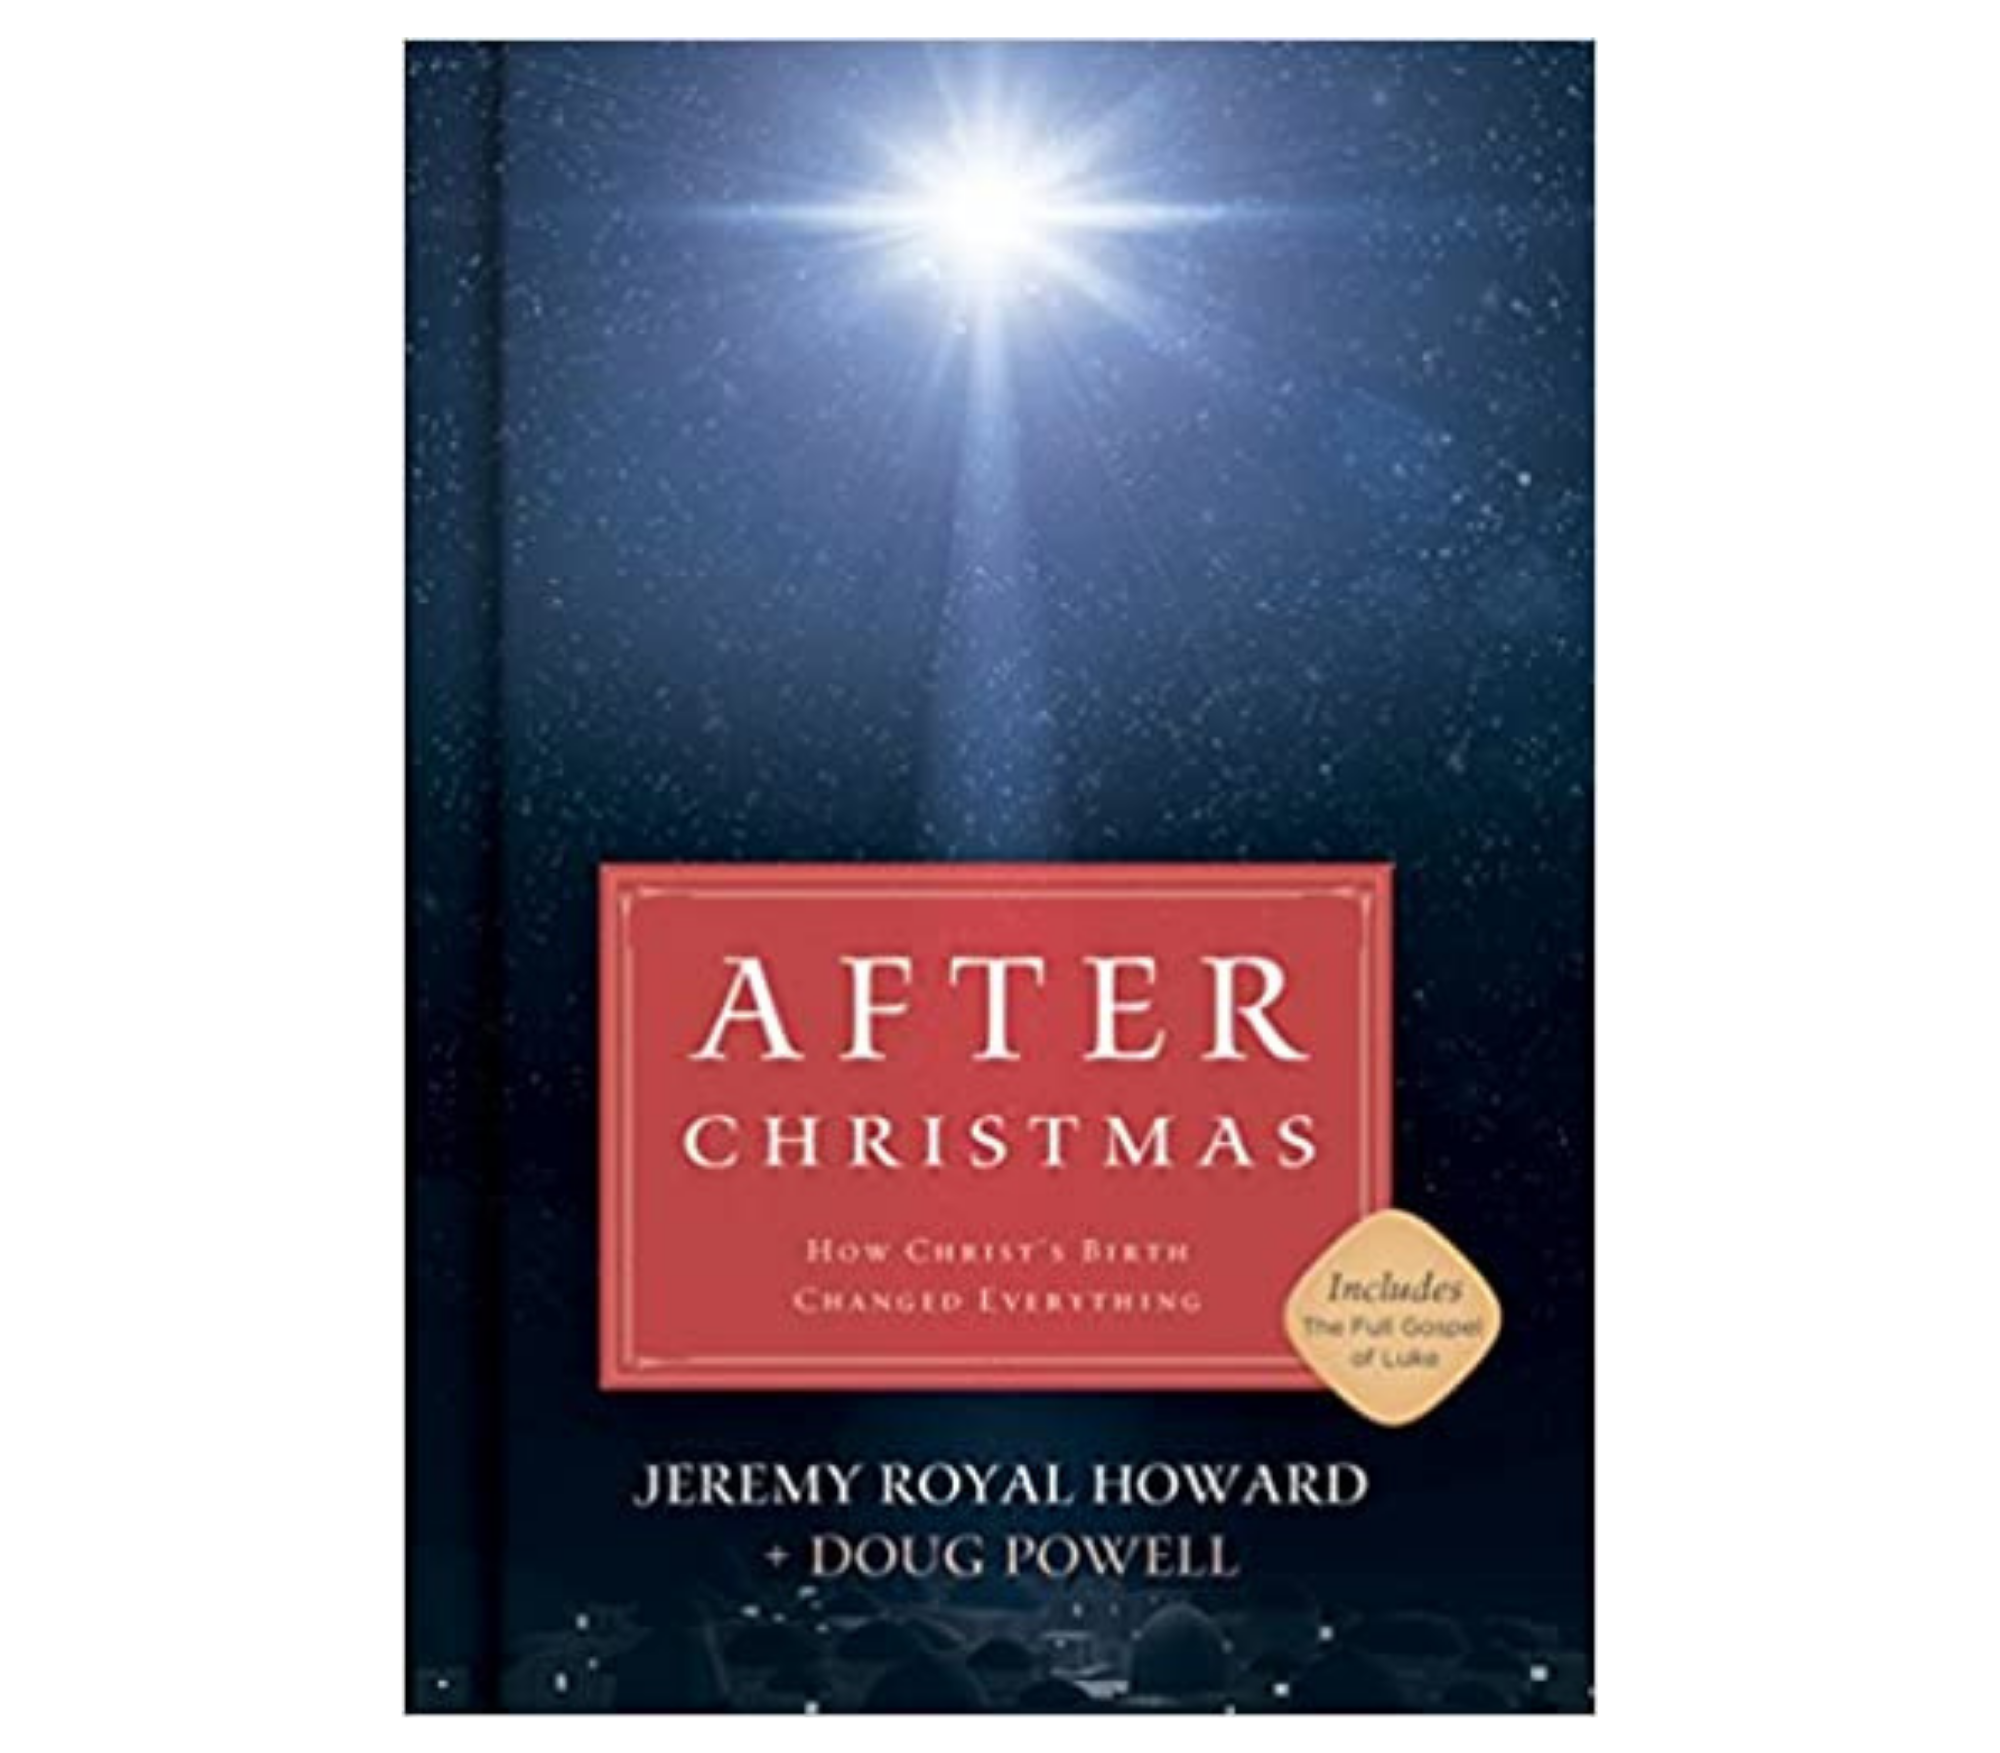 After Christmas - How Christ's Birth Changed Everything